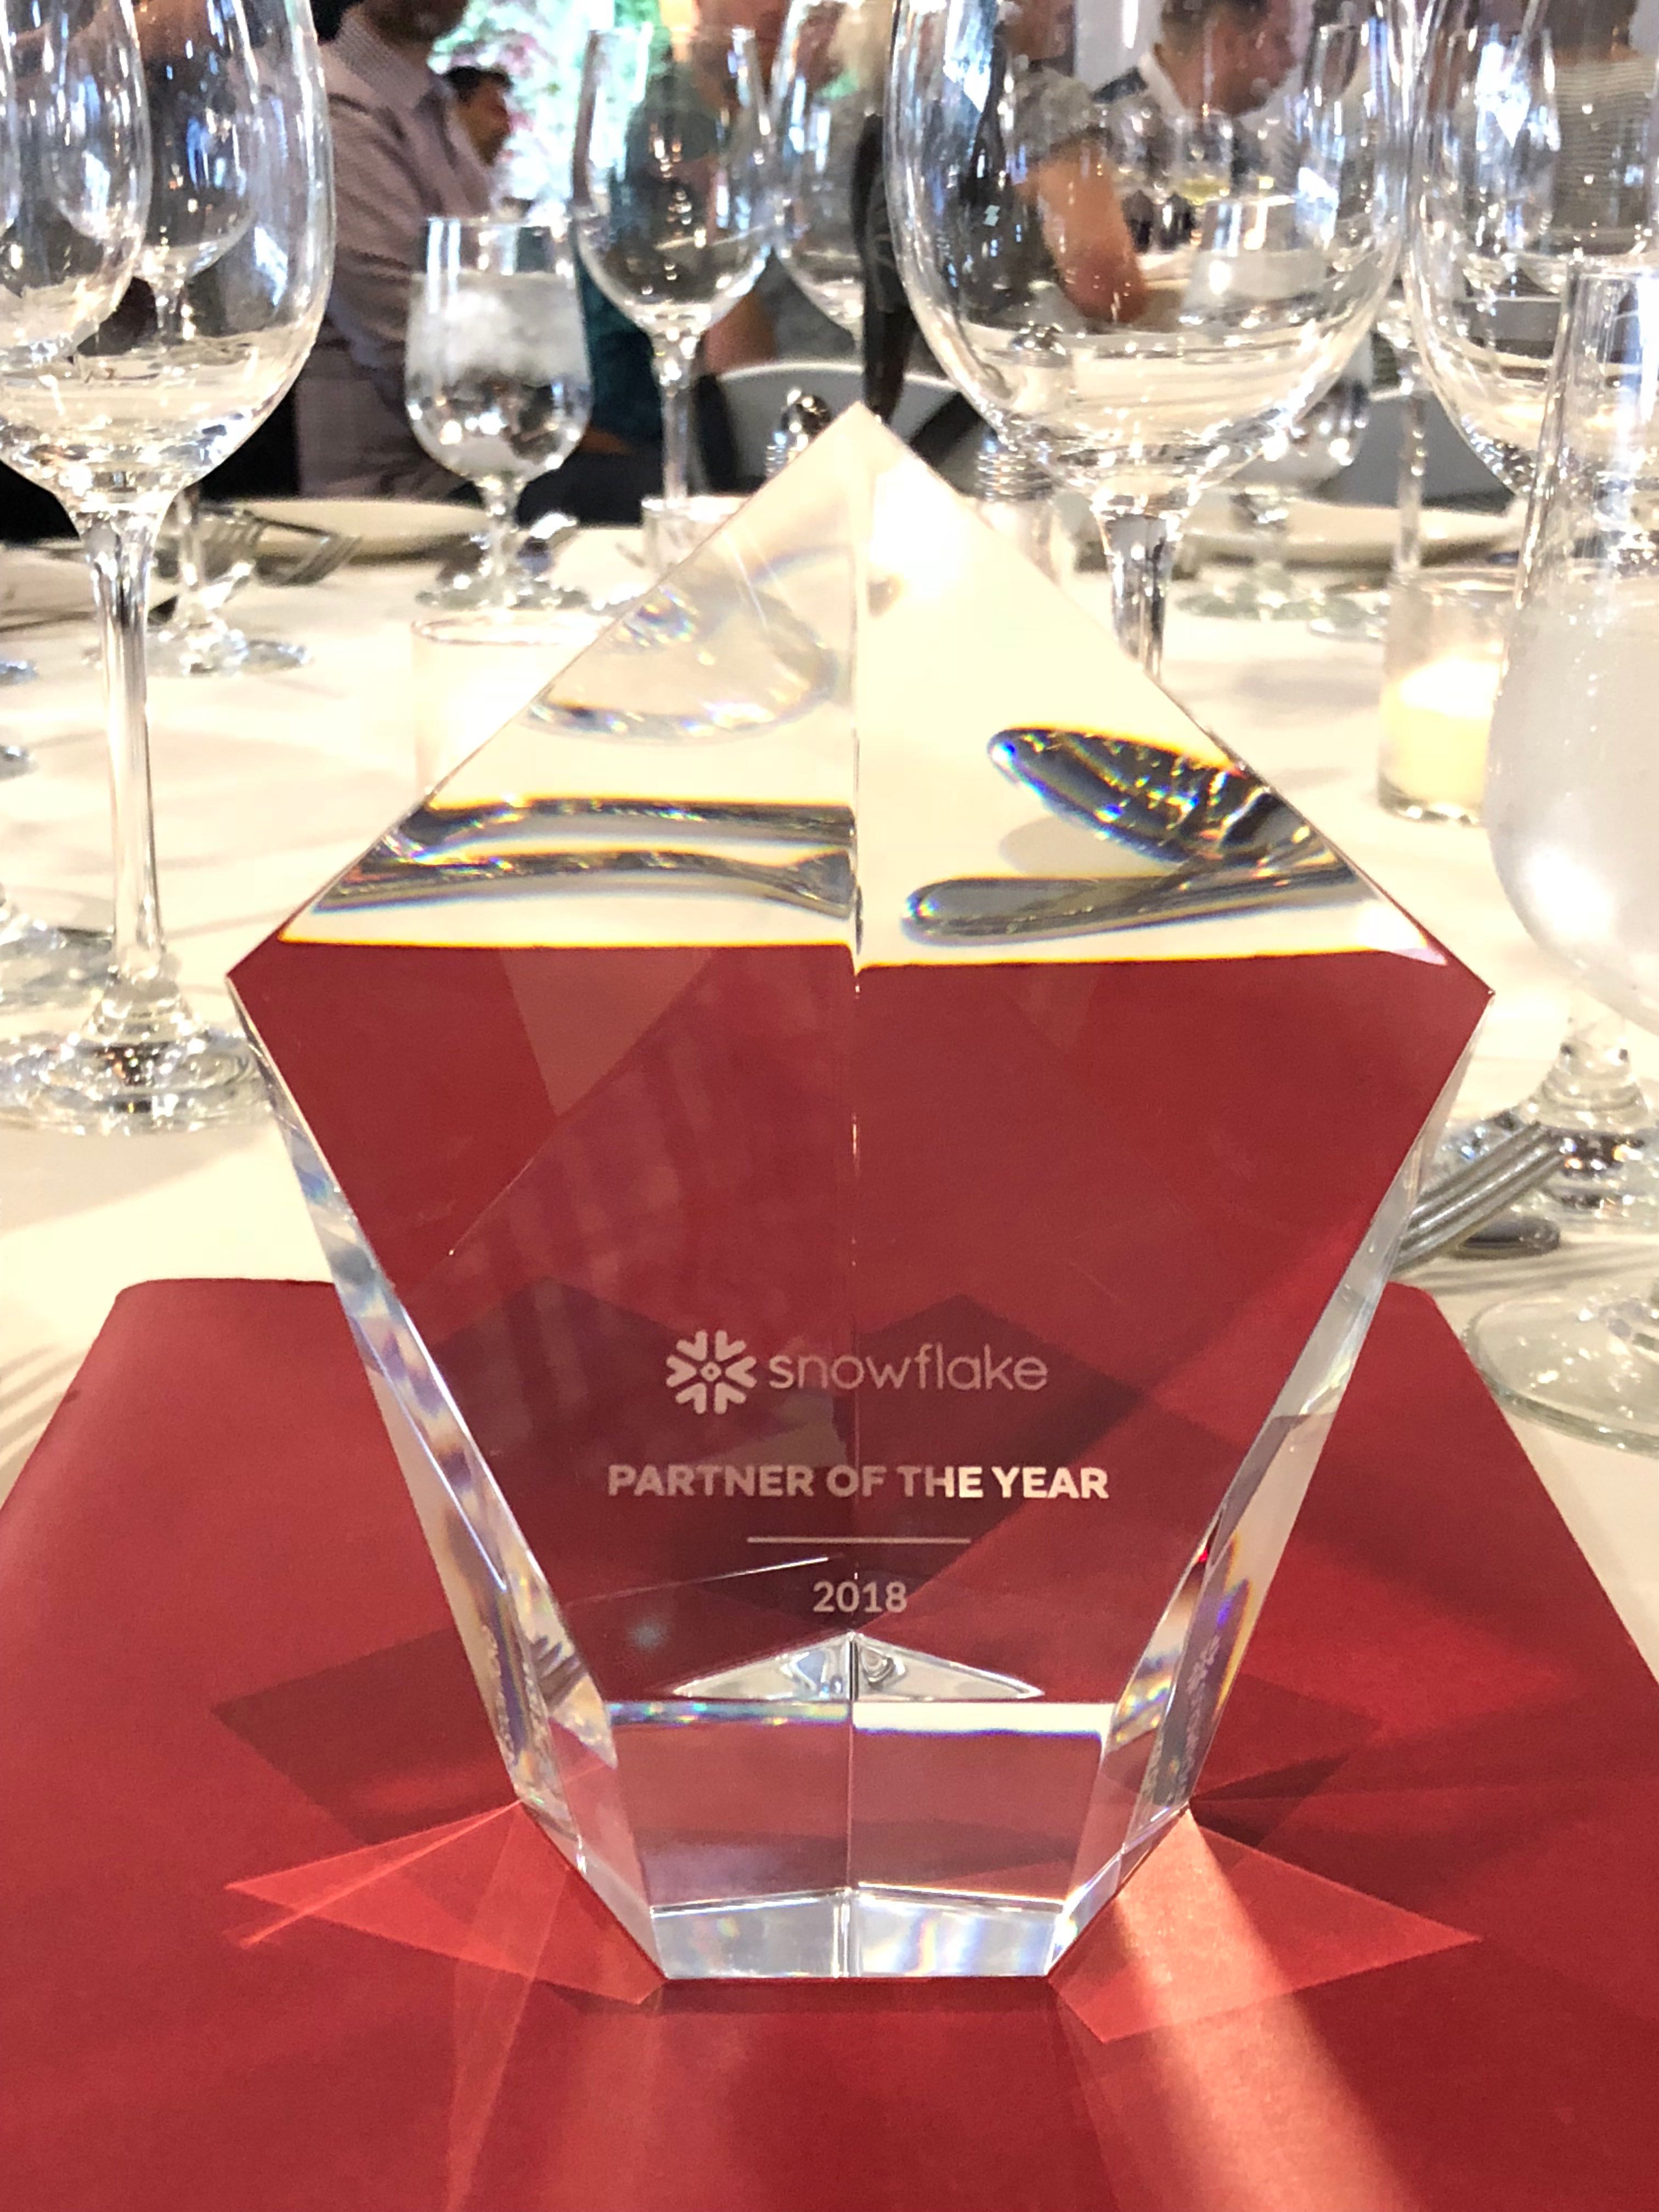 InterWorks' Snowflake Solutions Partner of the Year Award